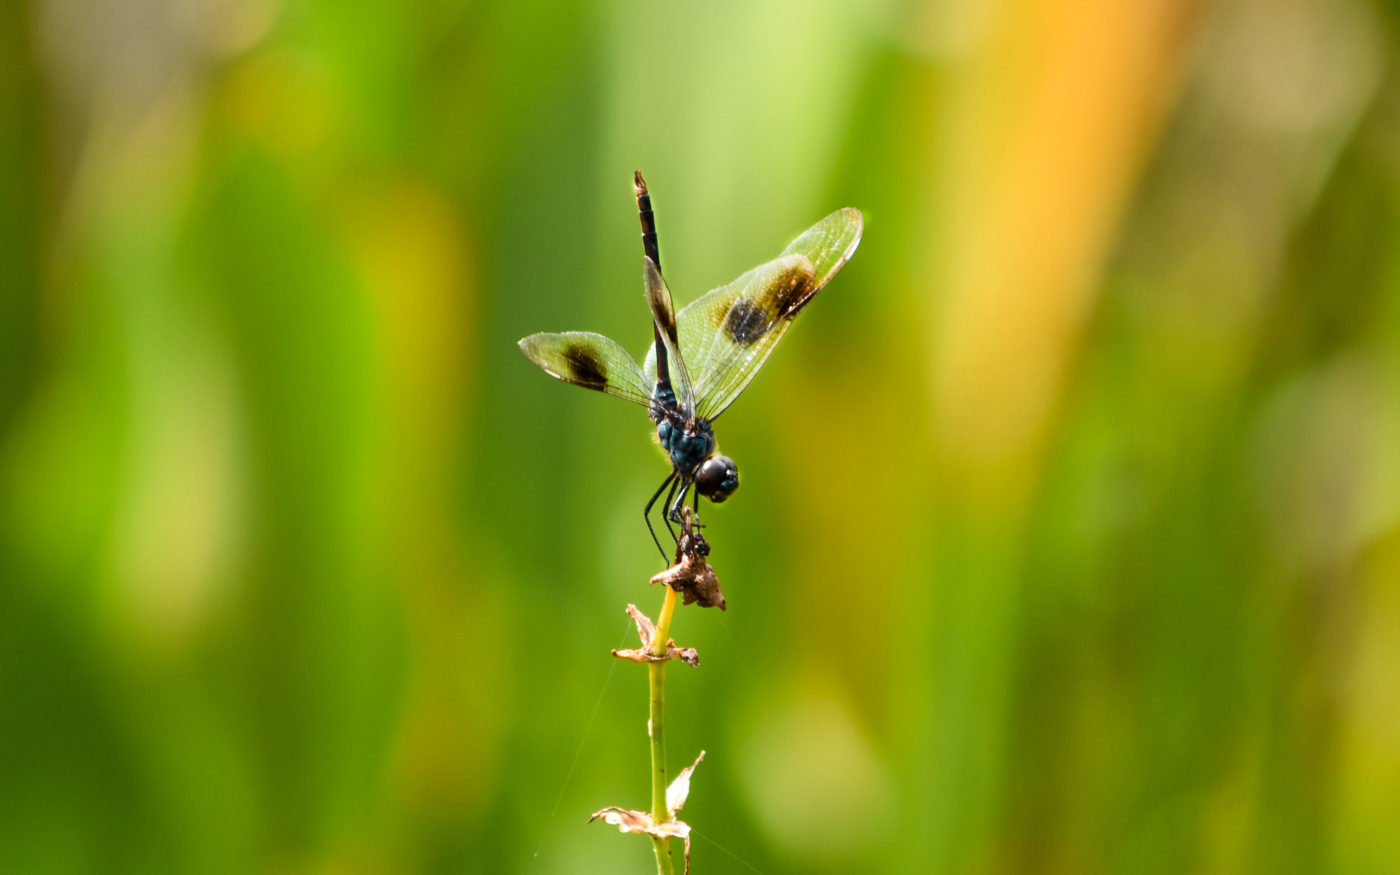 Dragonfly on a seed head